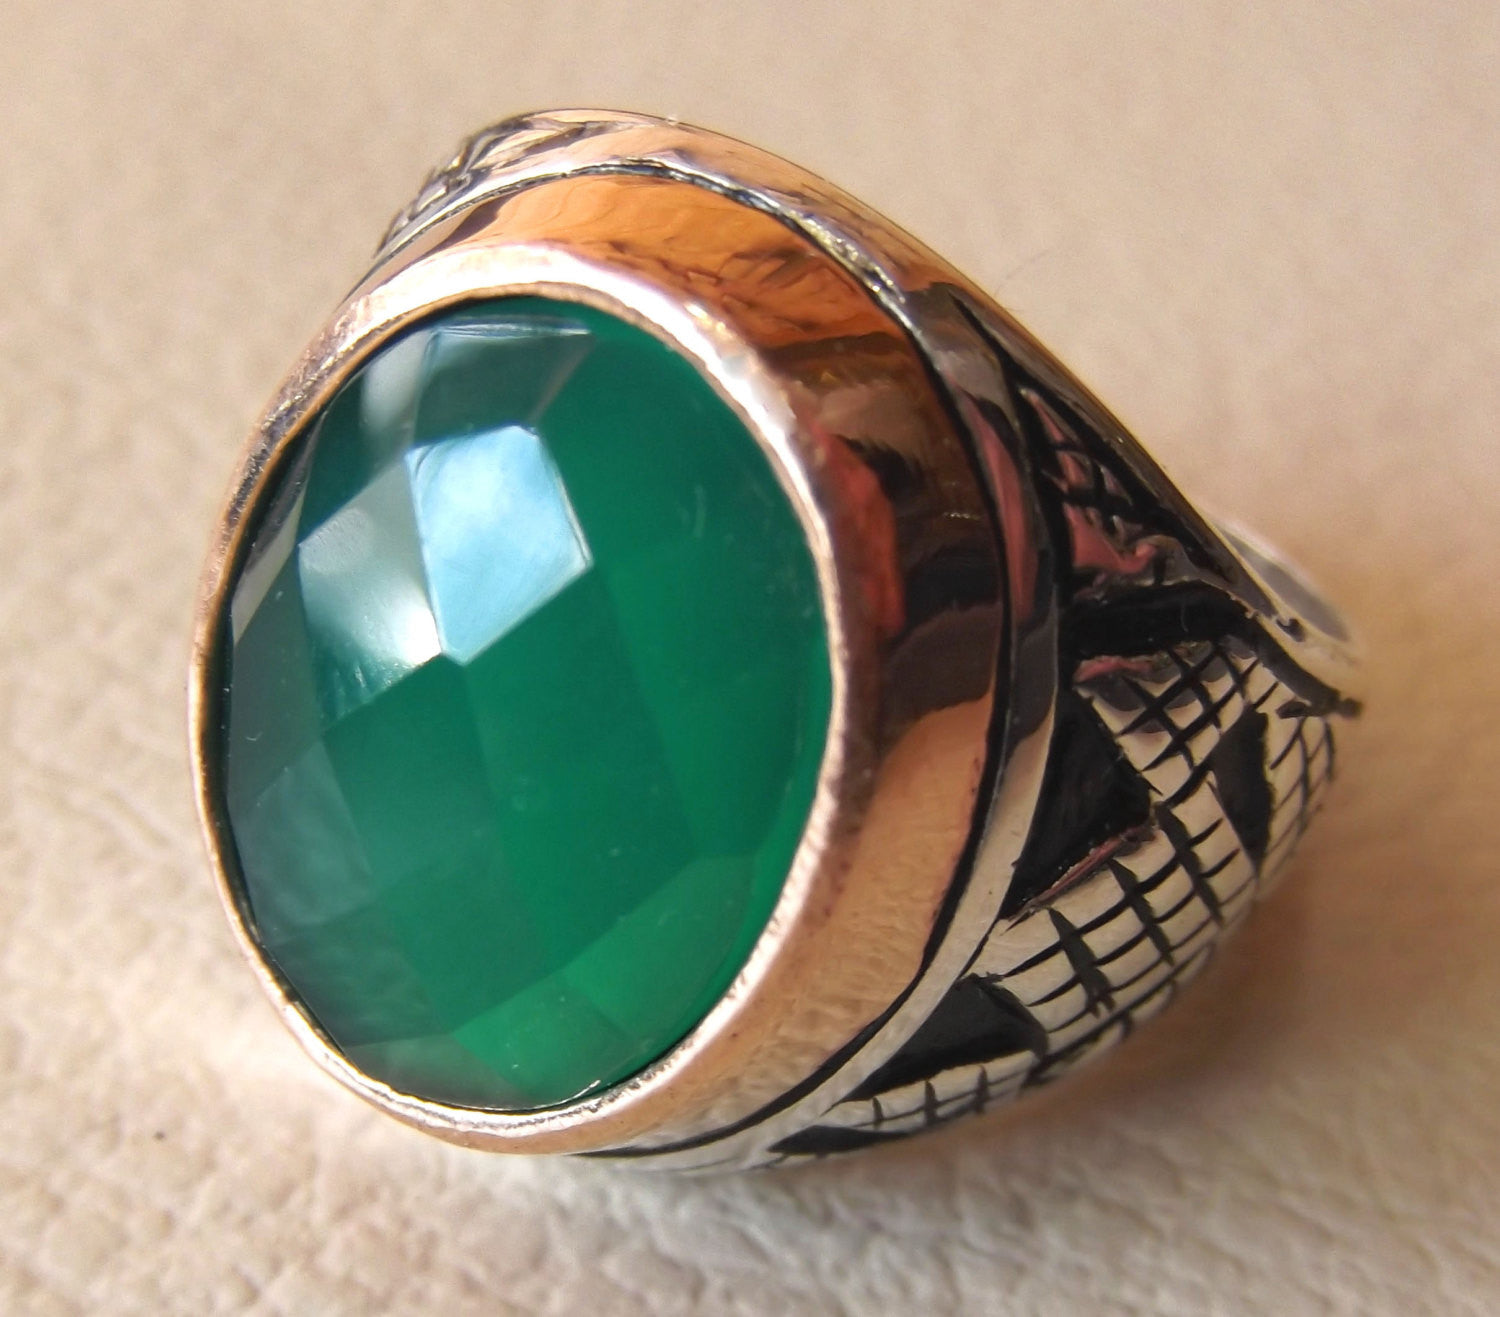 green agate aqeeq sterling silver 925 vintage men ring arabic style jewelry any size fast shipping faceted semi precious natural stone